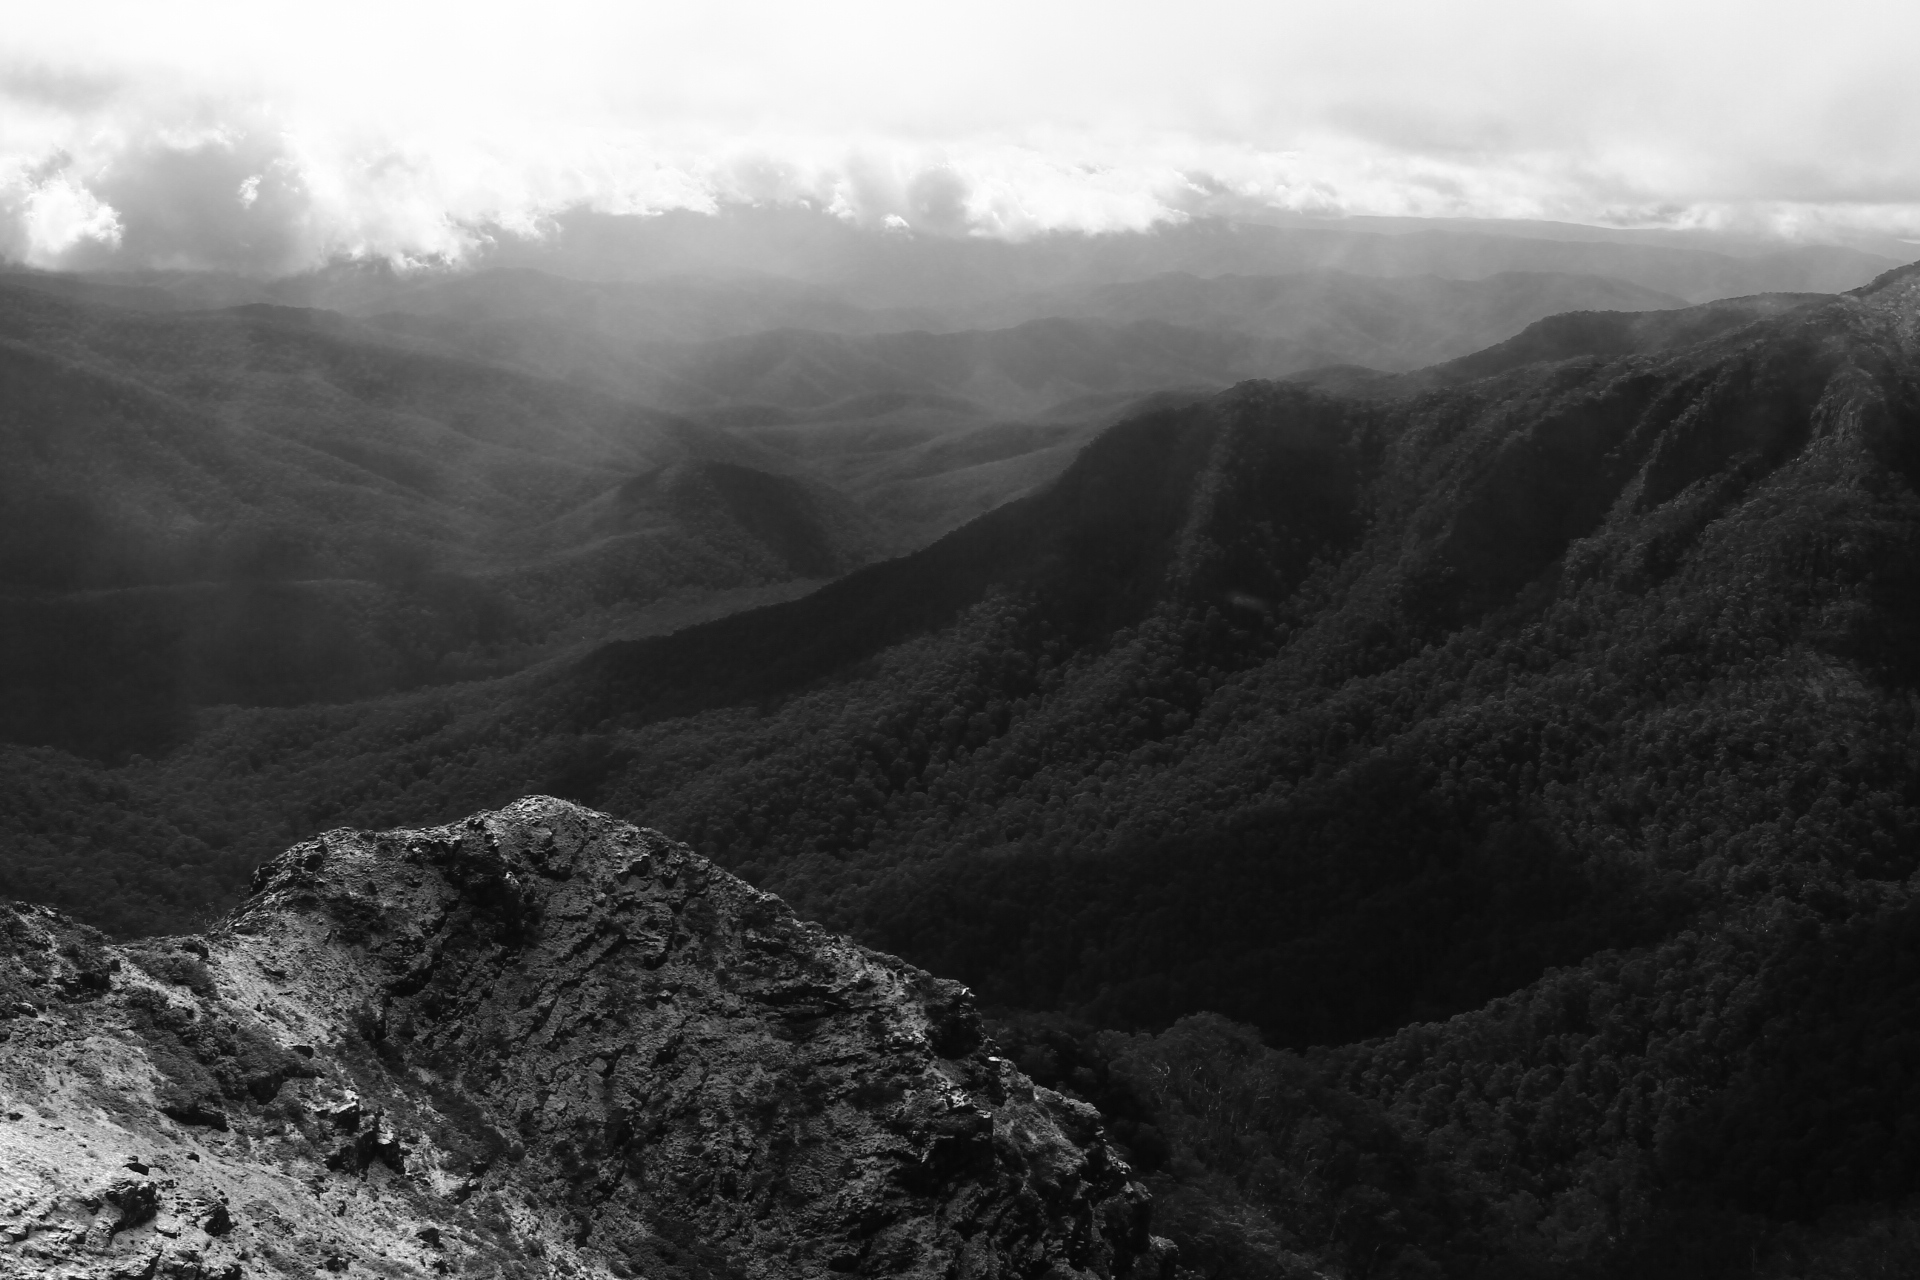 Looking South East from the Icy tops of the Crosscut Saw, AAWT Alpine National Park, Crosscut Saw